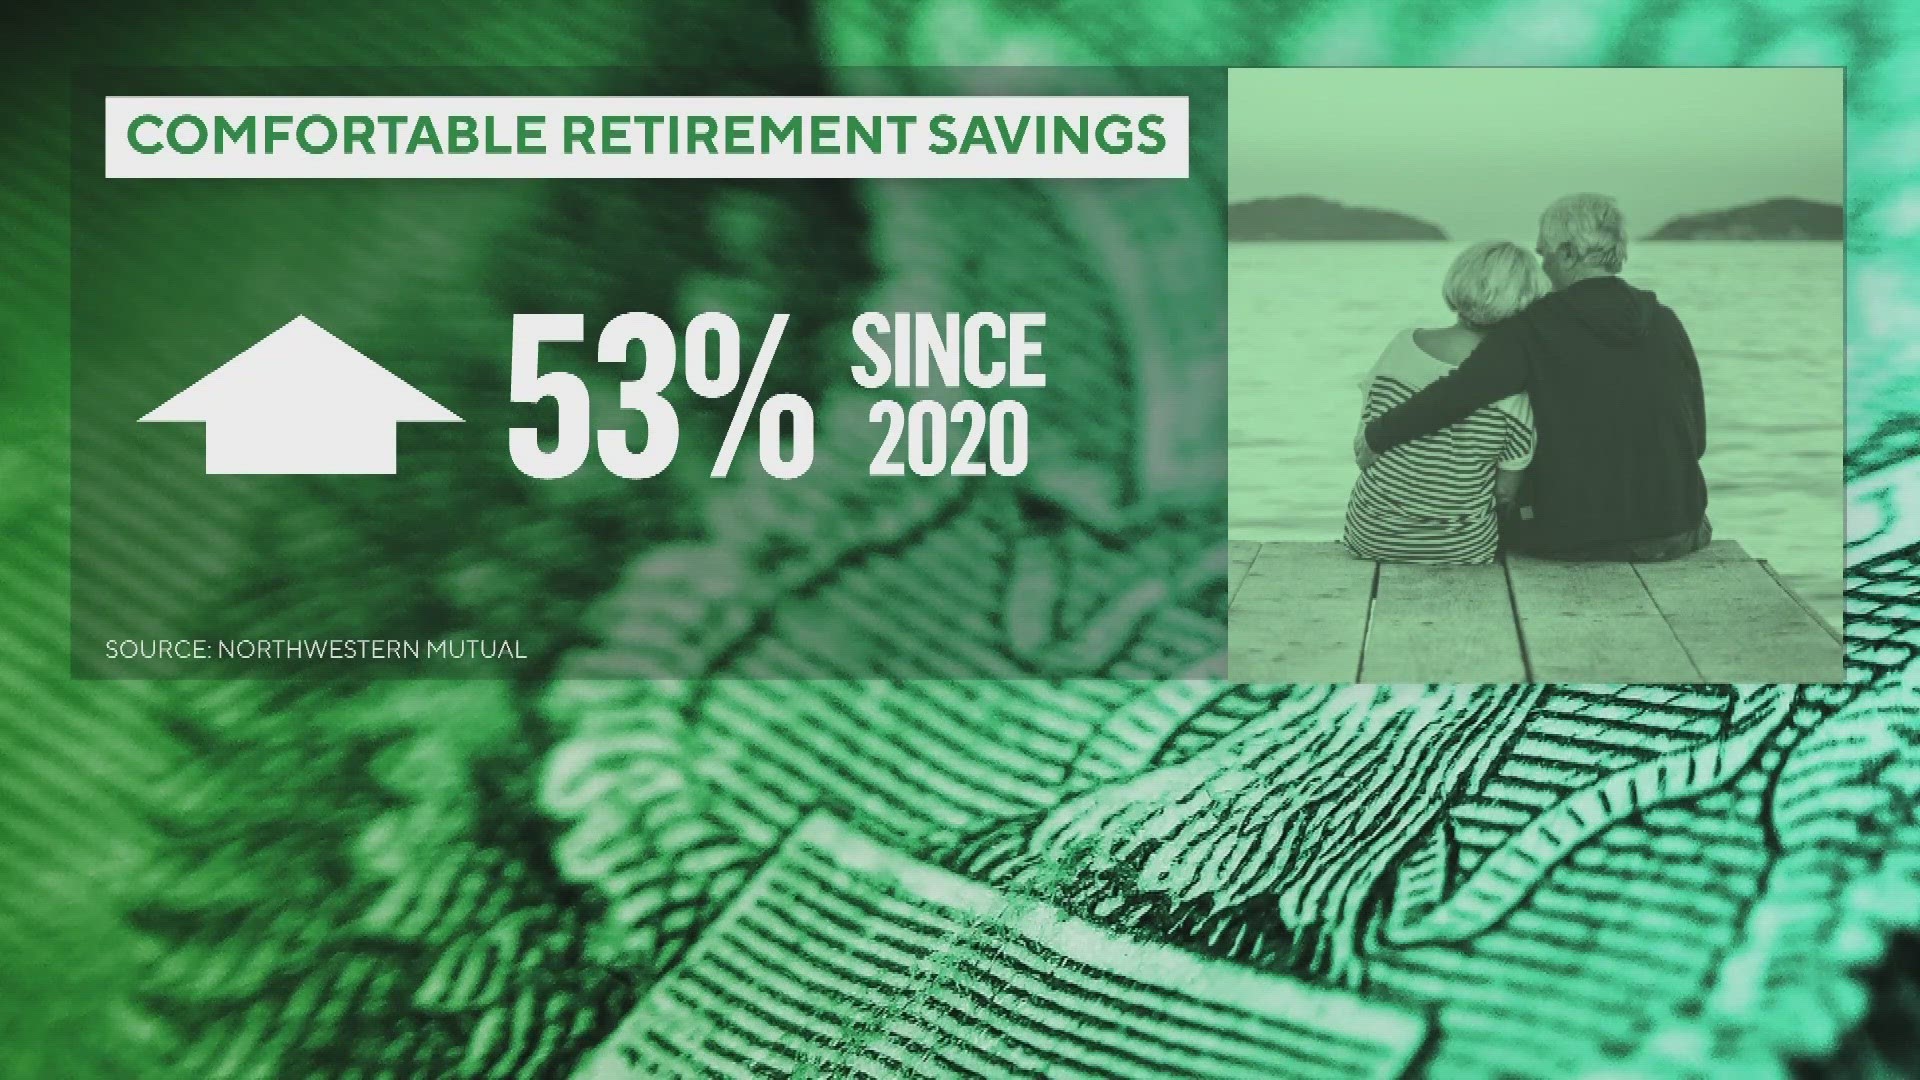 A recent study shows that the amount of savings needed to retire comfortably has gone up 53%.